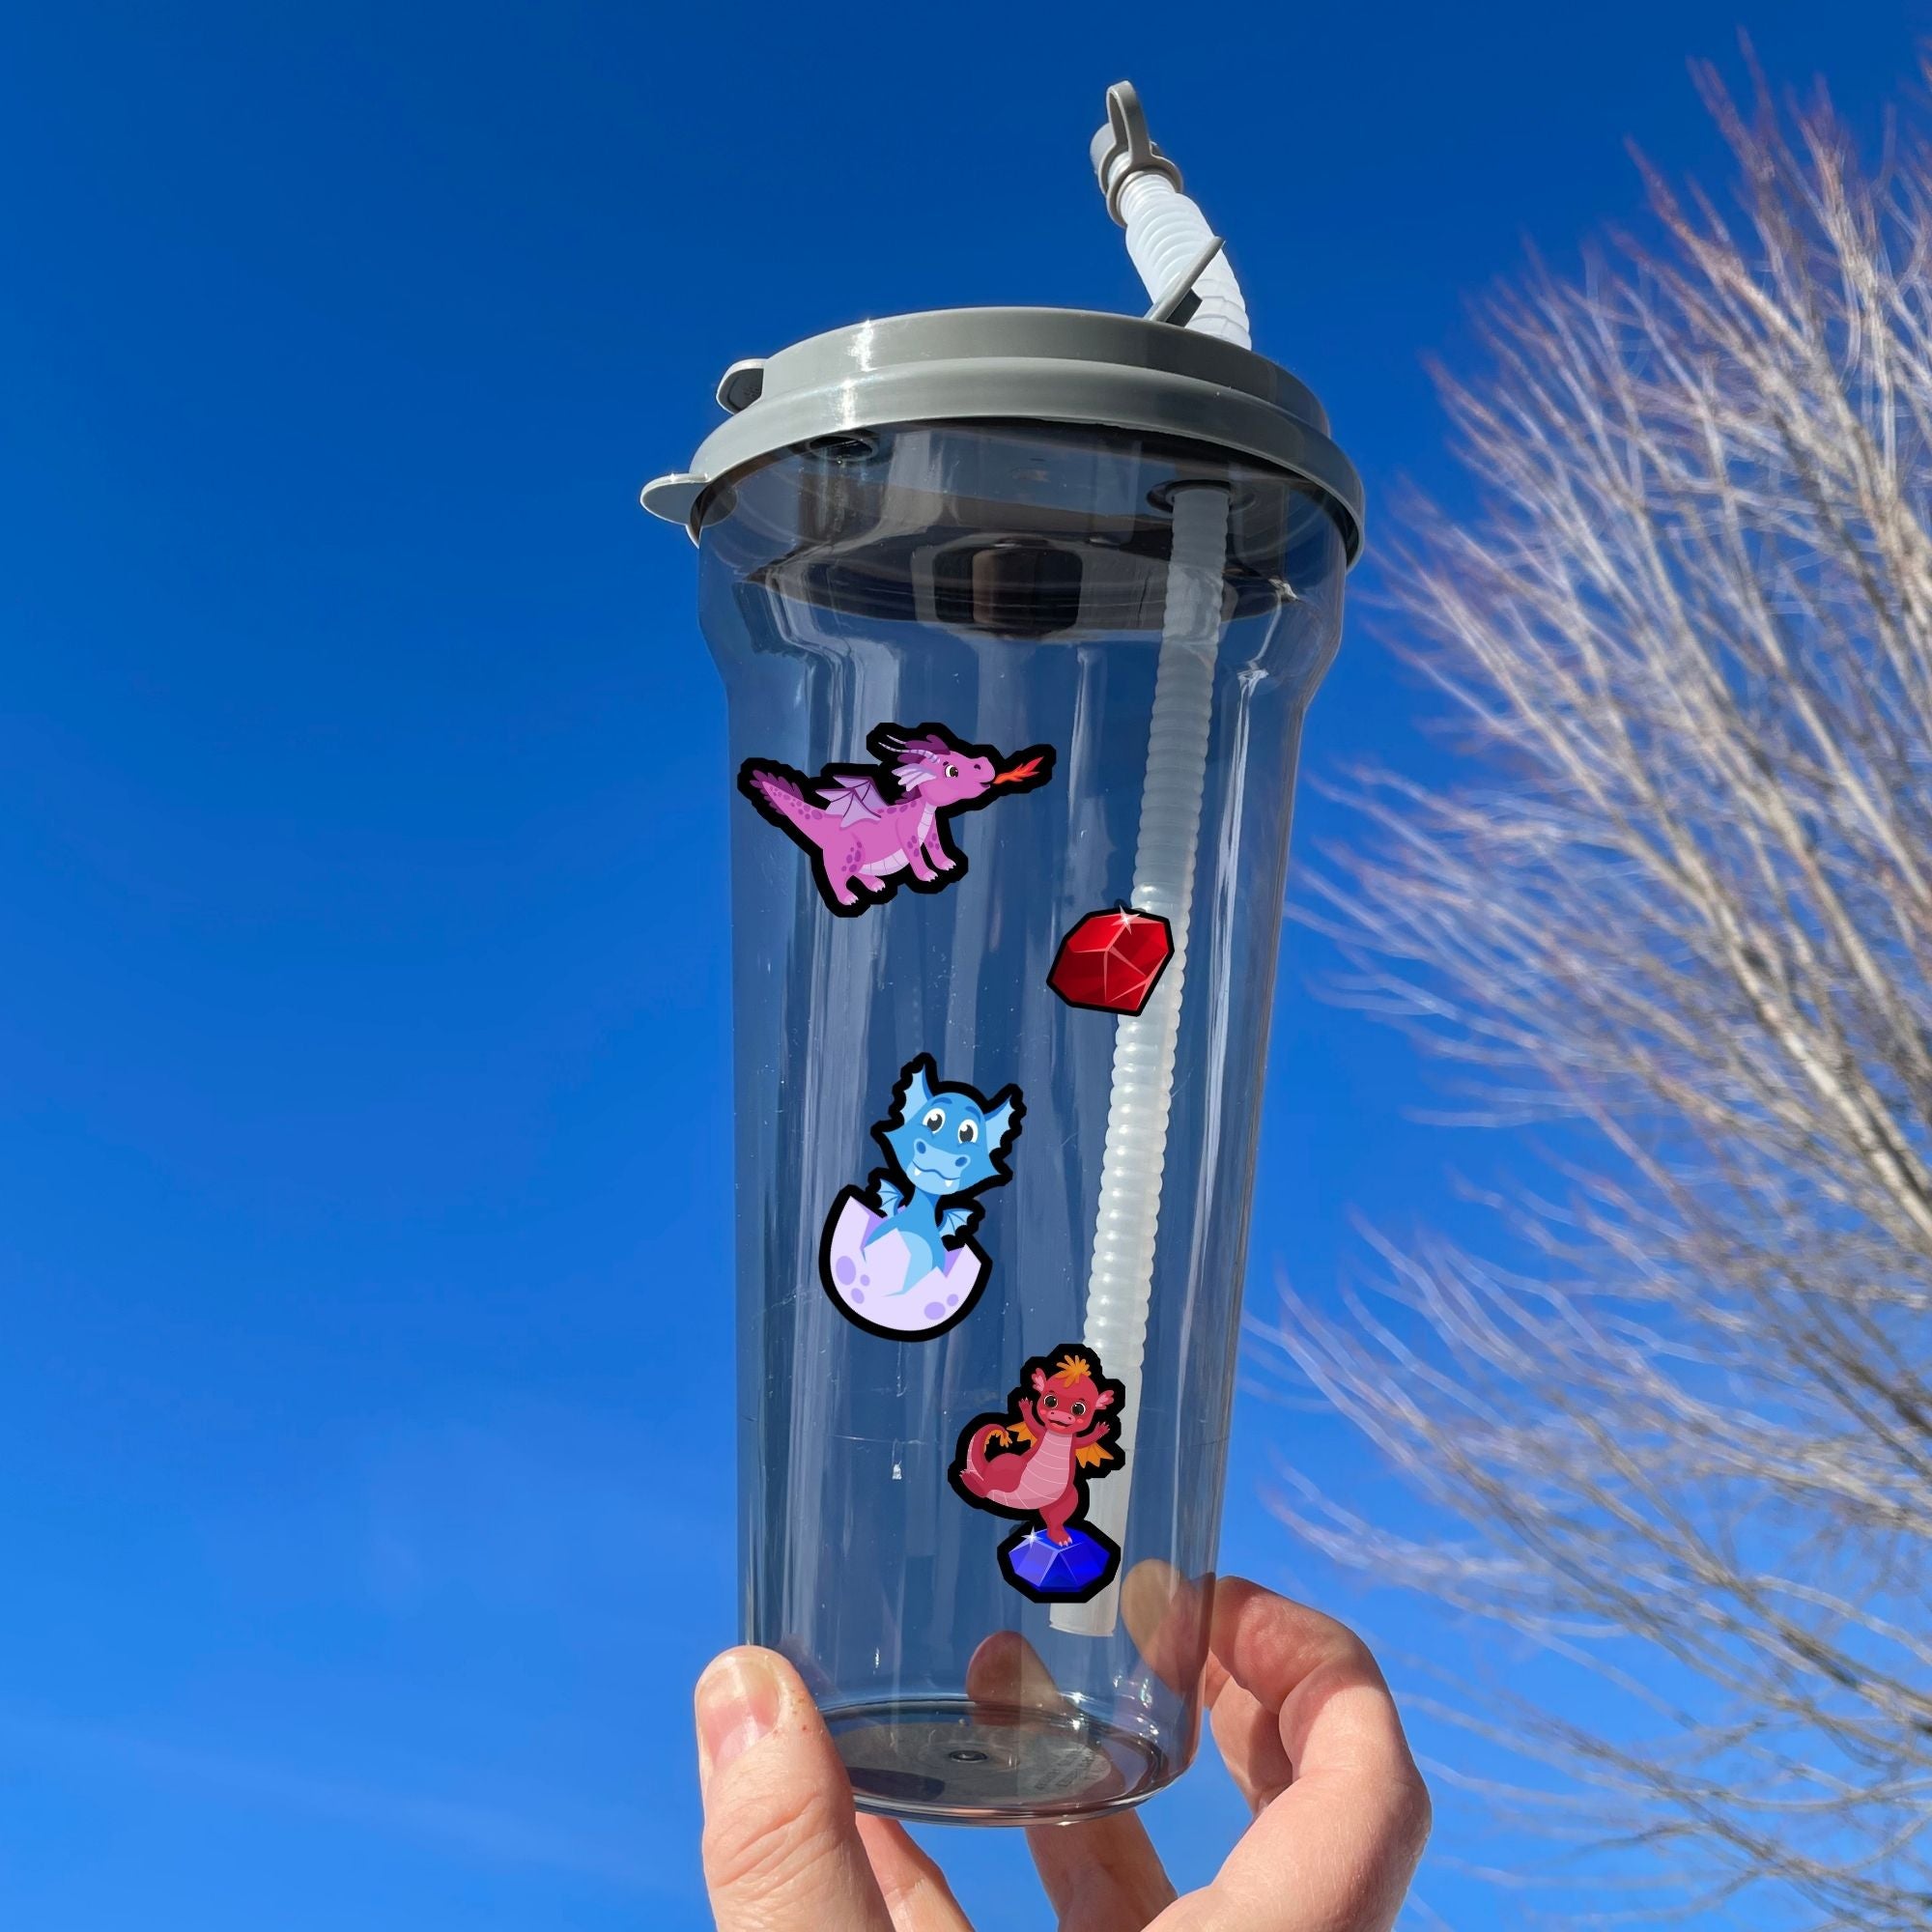 This image shows a water bottle with some of the Dragon's Lair stickers applied.